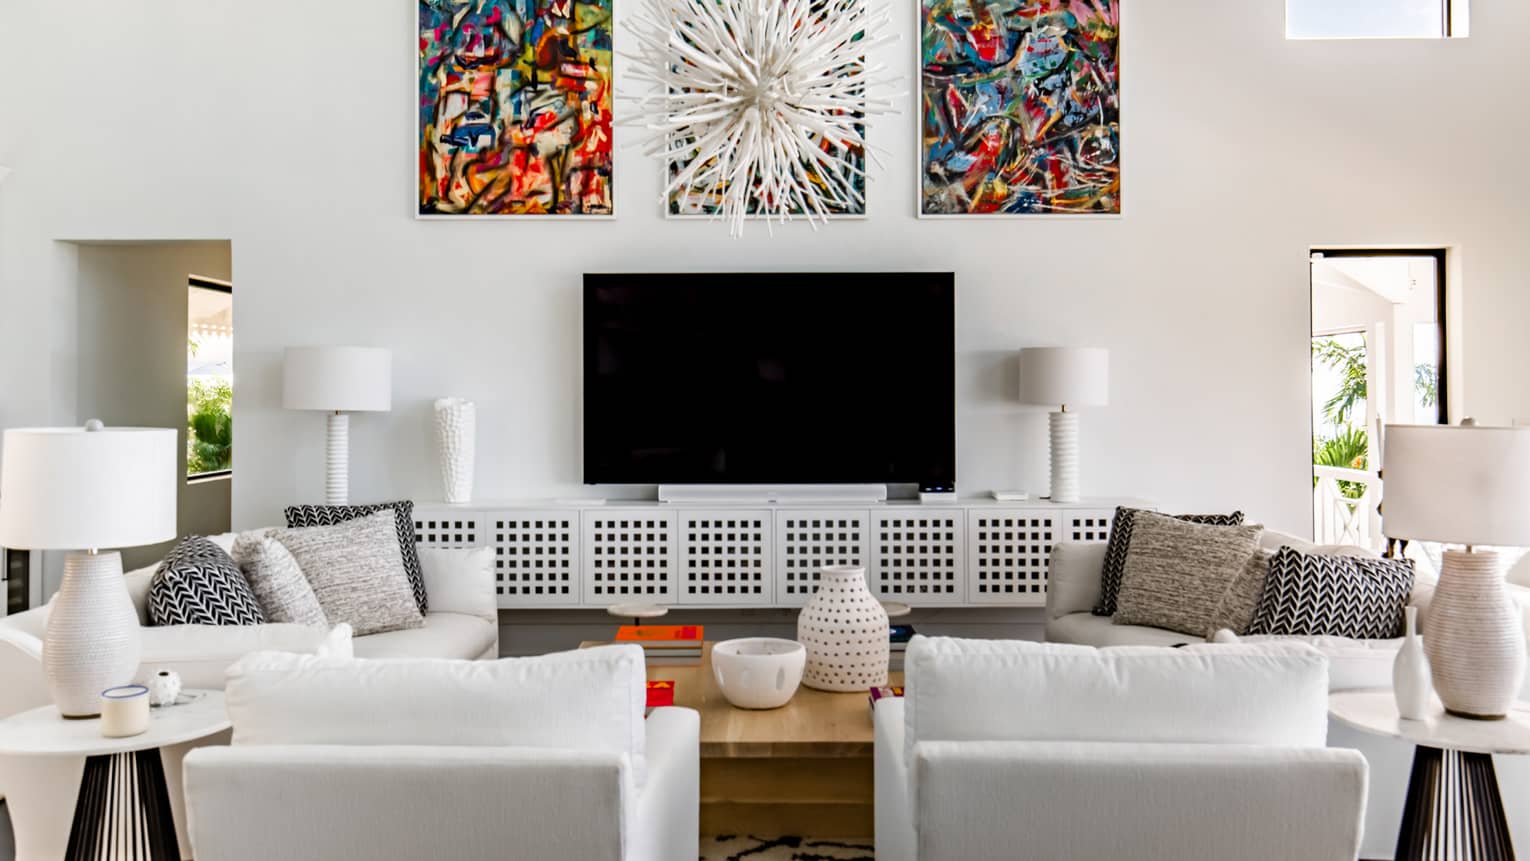 Living room with two white sofas, two white armchairs, TV and three artwork